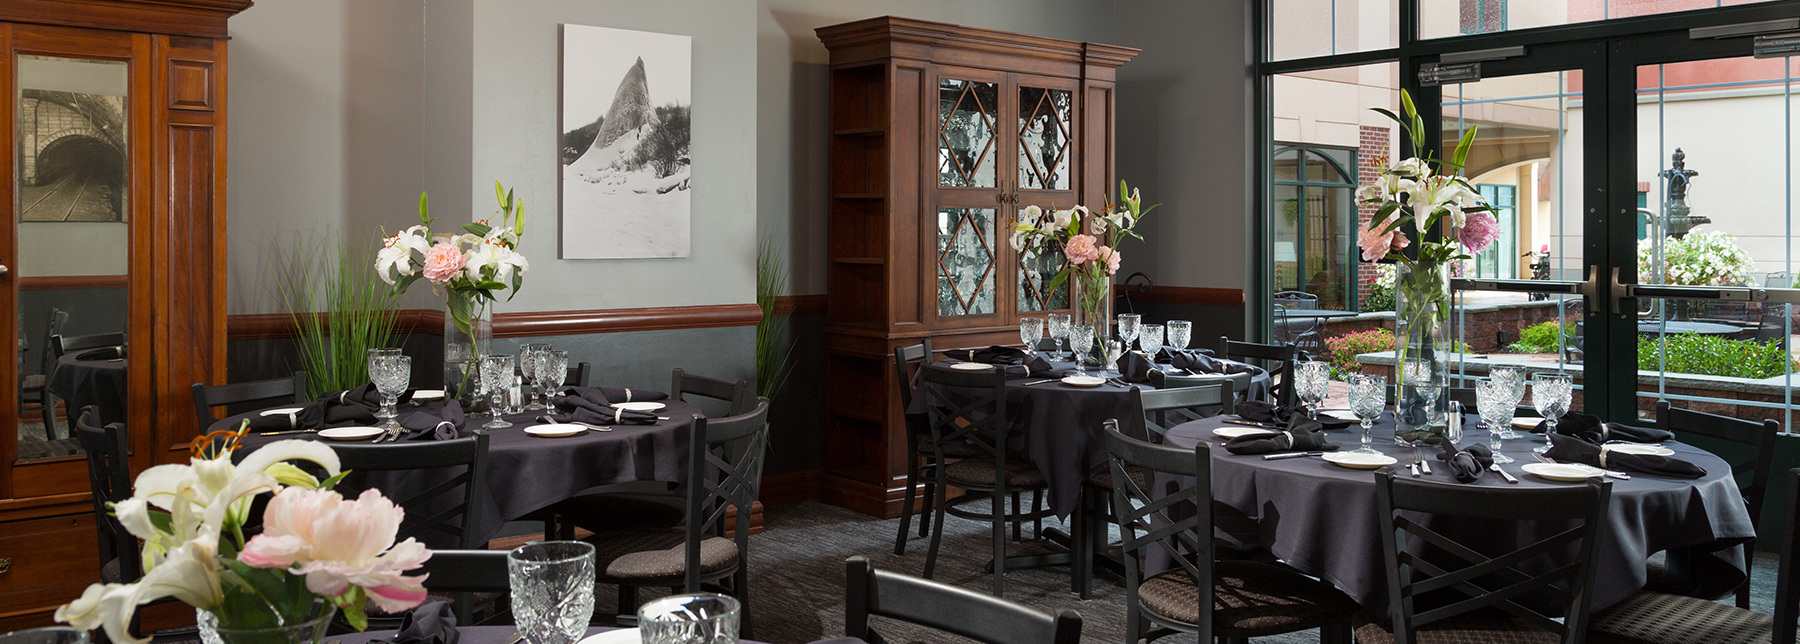 Hotel Anthracite Private Dining Room